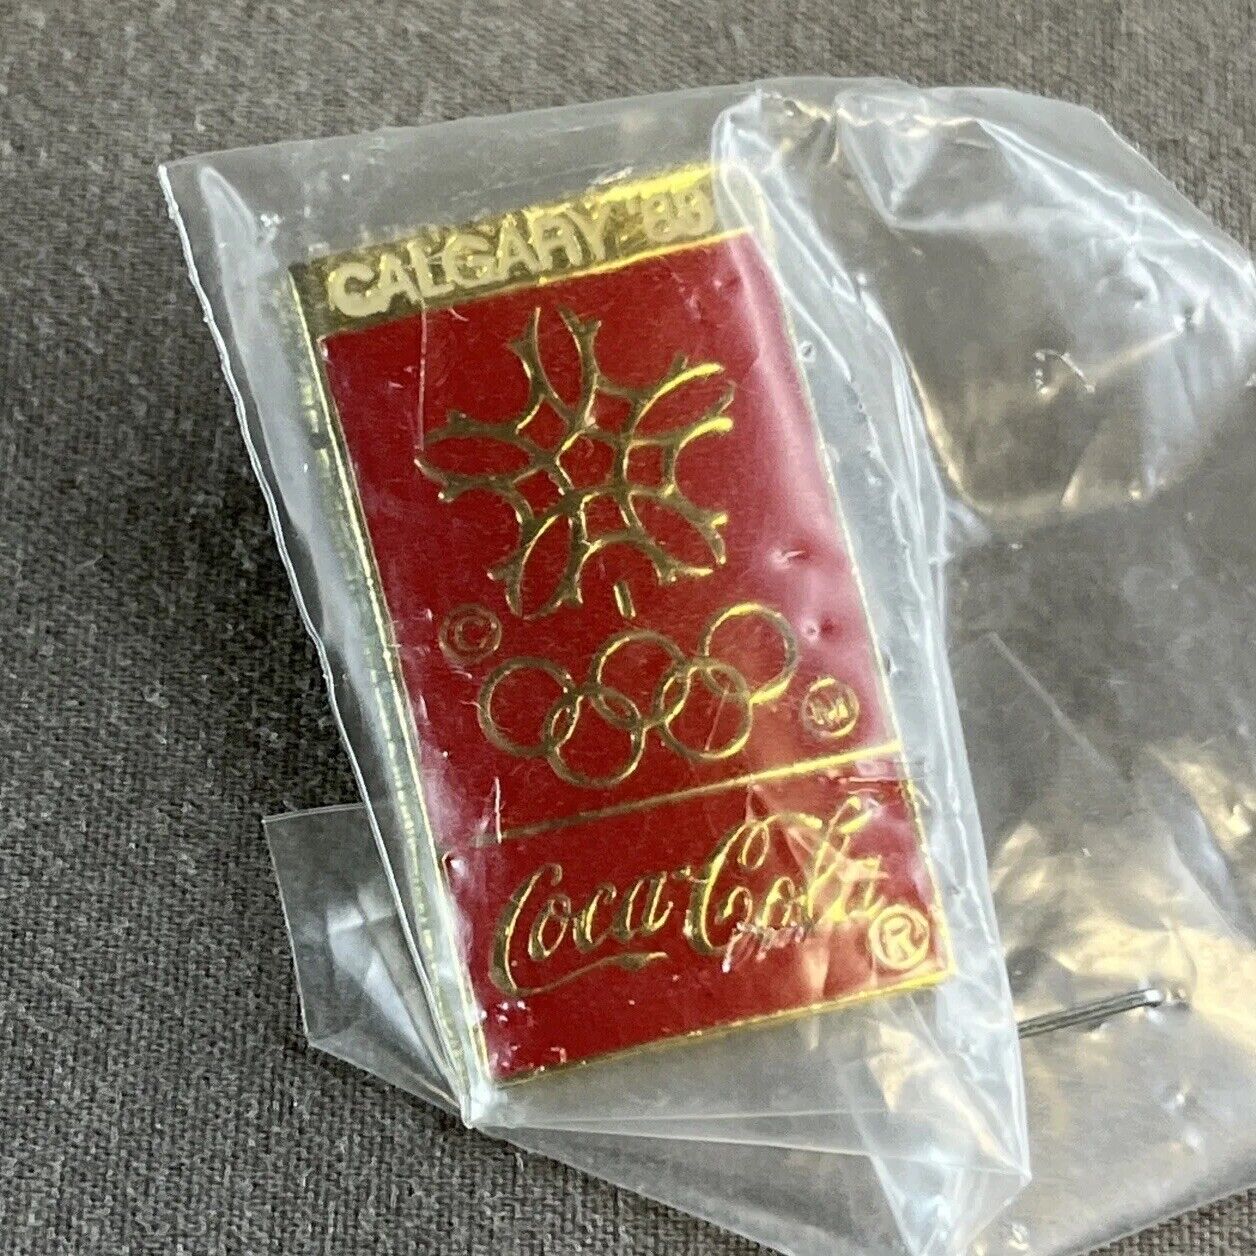 1988 Calgary Olympics Coca-Cola Maple Leaf Red Pin *FREE SHIPPING*BRAND NEW*